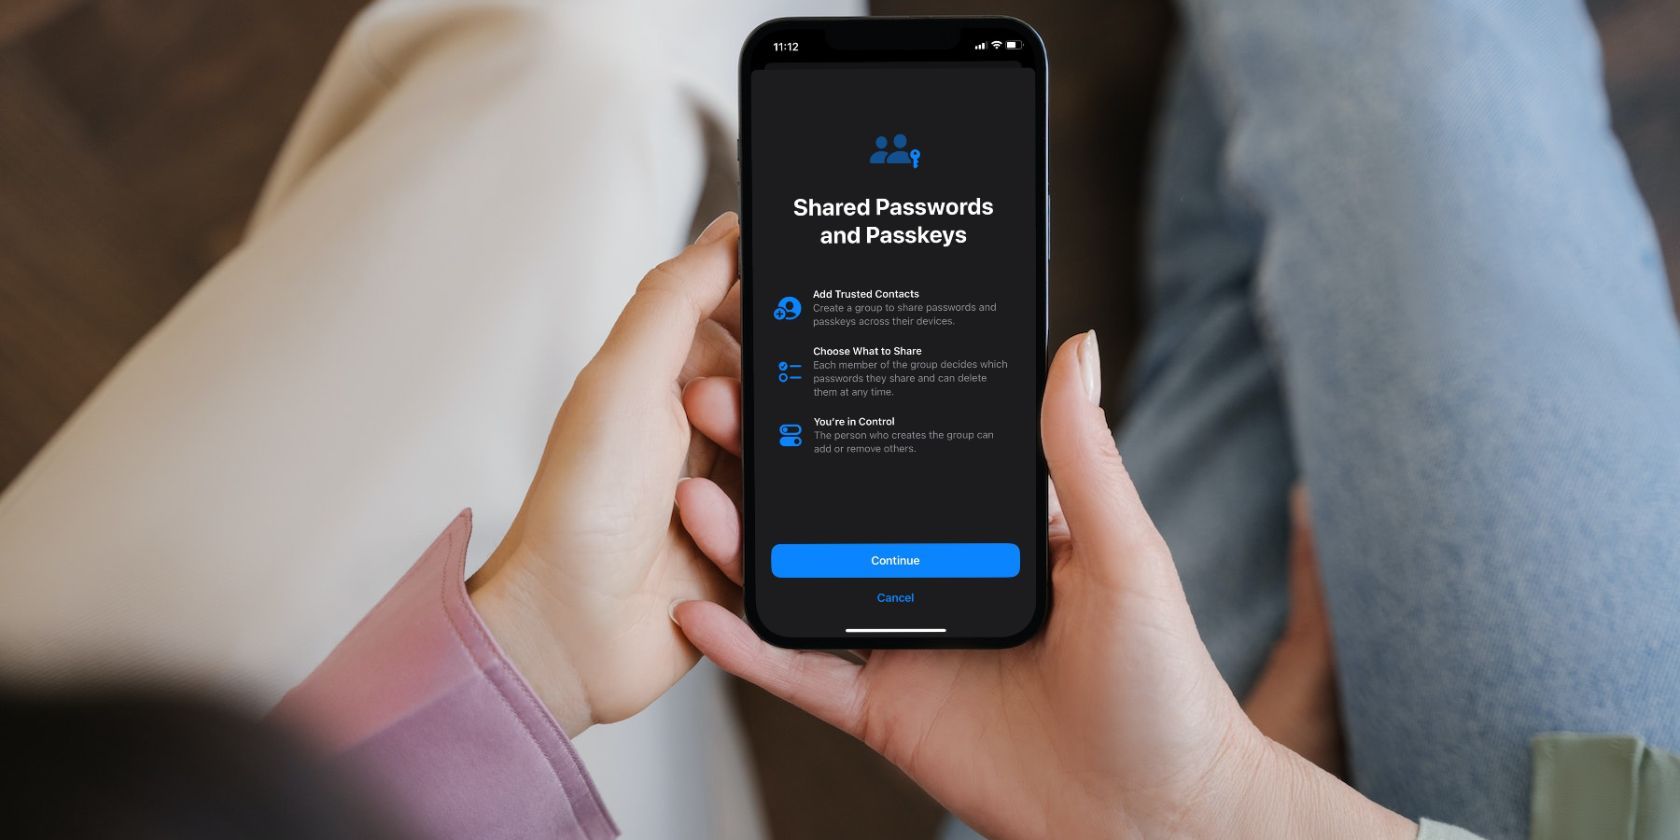 Shared Passwords and Passkeys feature being displayed on an iPhone